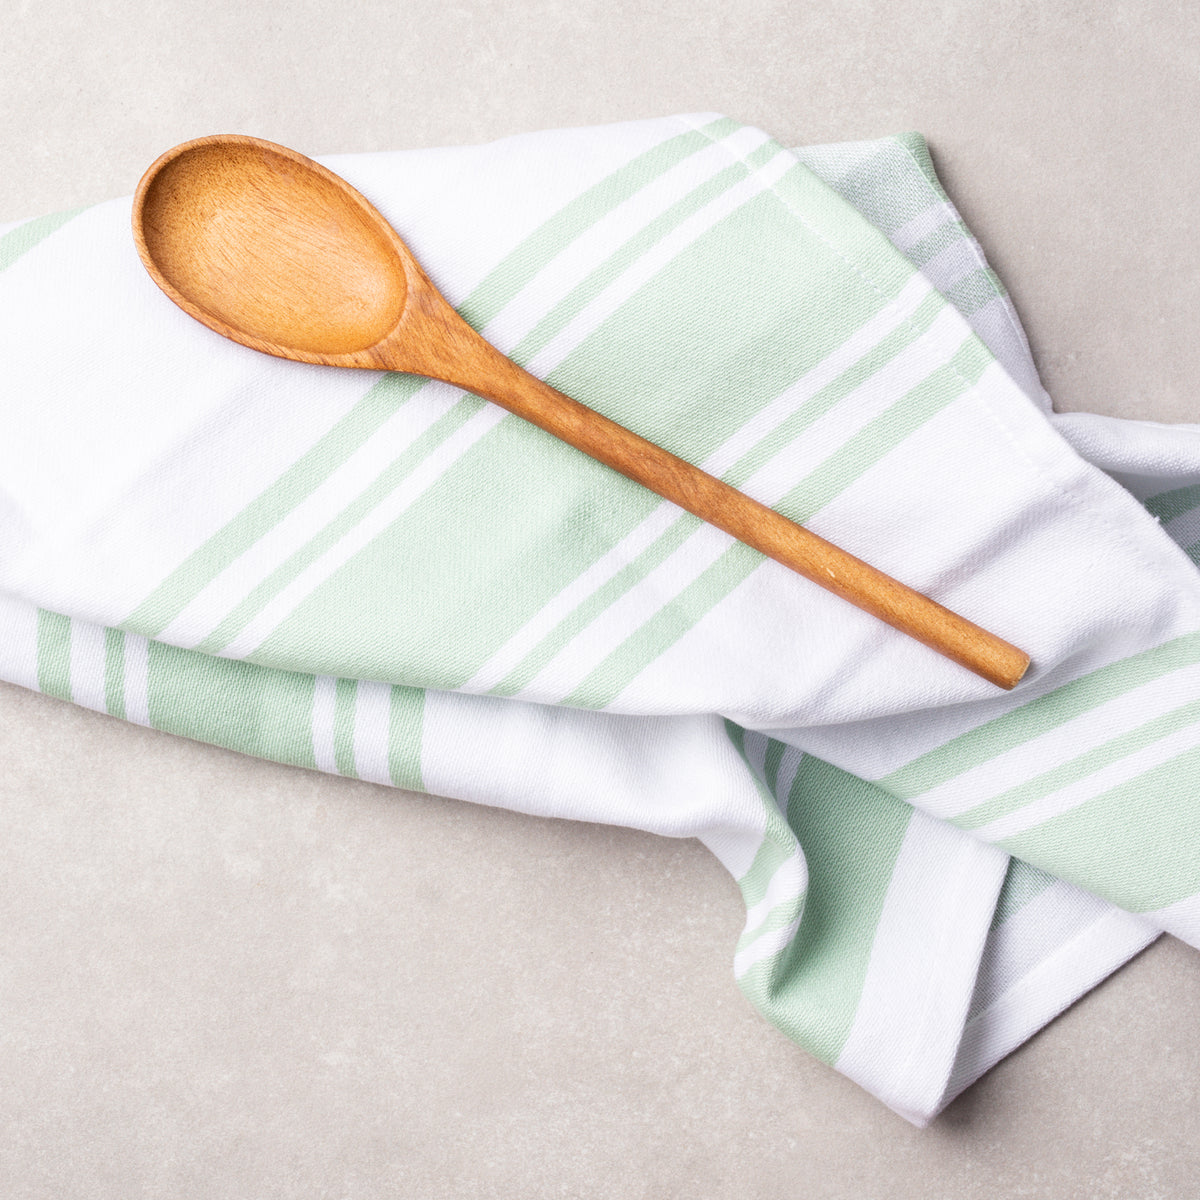 The Organic Company Kitchen Towel Gift Set– Greentail Table